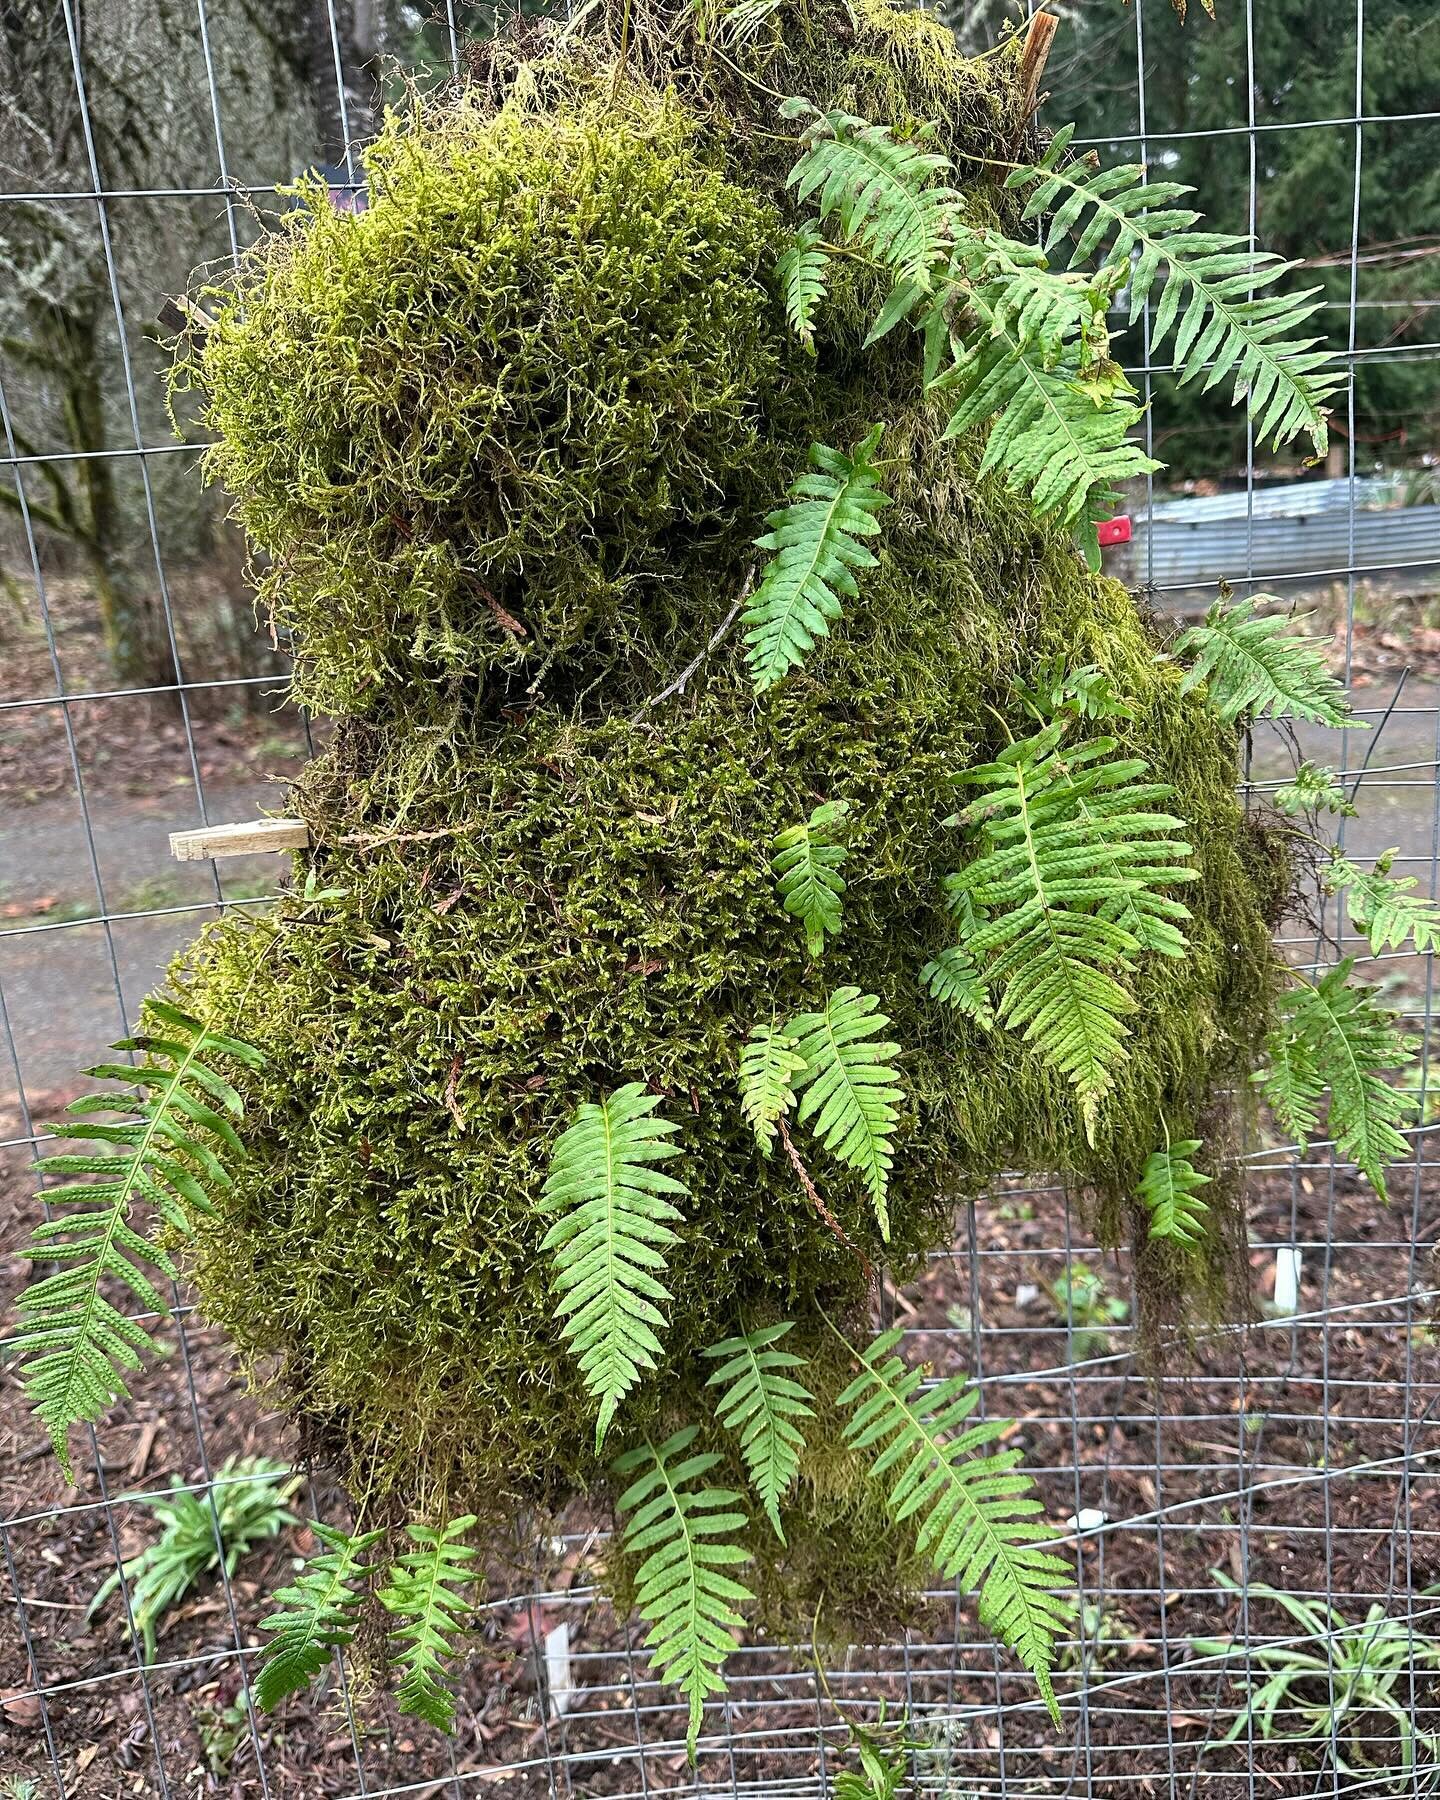 We have some nice Licorice Fern mossy slabs up for sale! (Polypodium glycyrhizza) They range in price from $12-$40, depending on size and amount of licorice rhizome. 

These beauties were growing up high on red alder trees in the nursery forest until